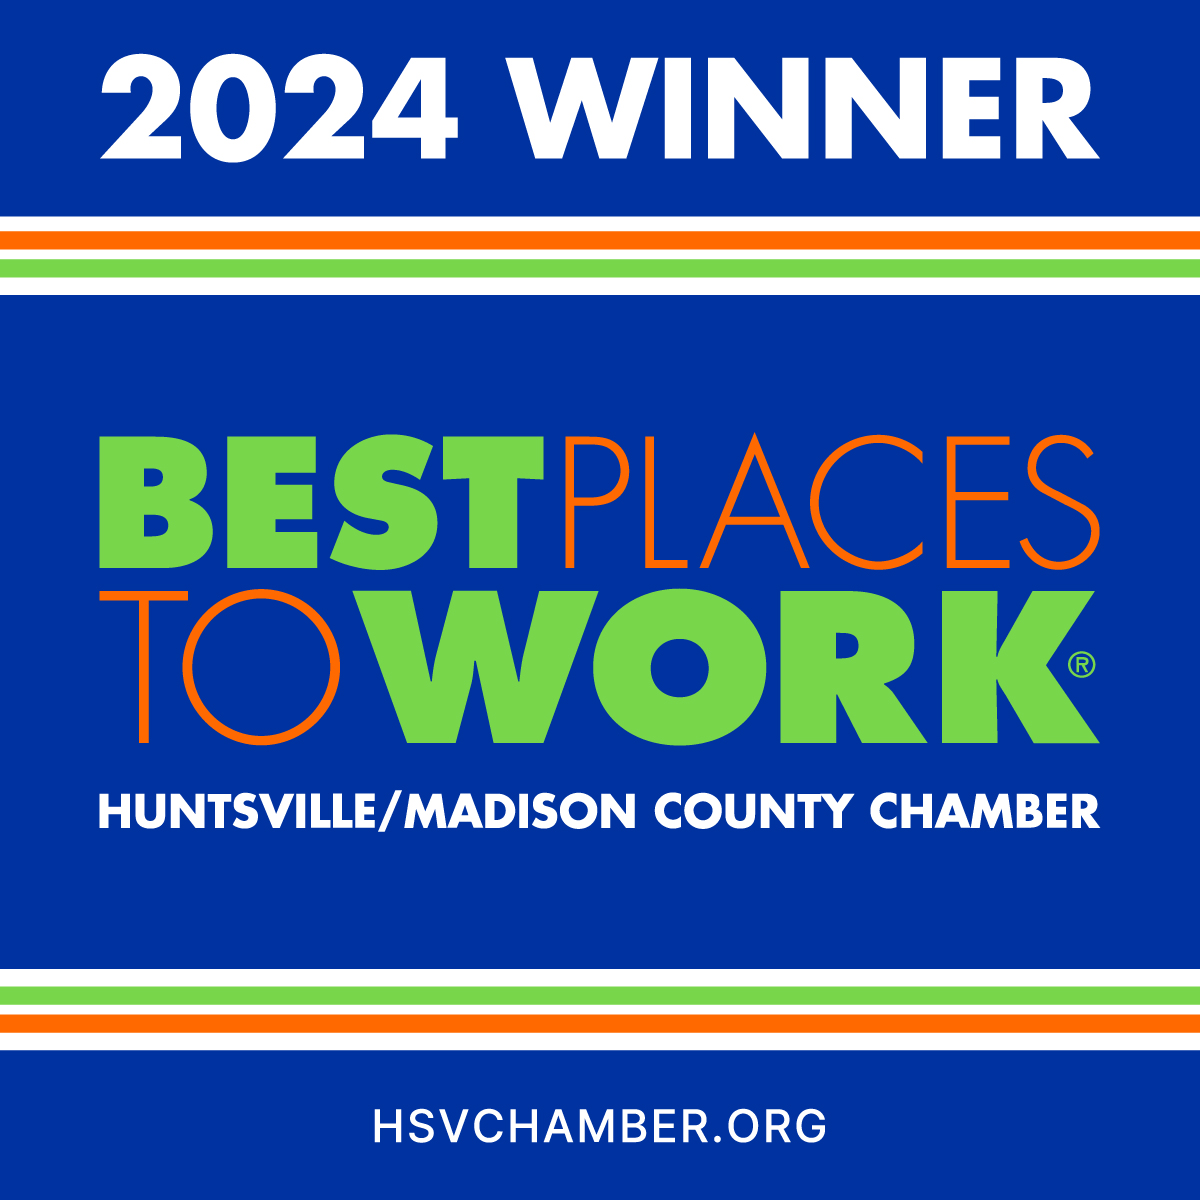 2024 Winner - Best Places to Work